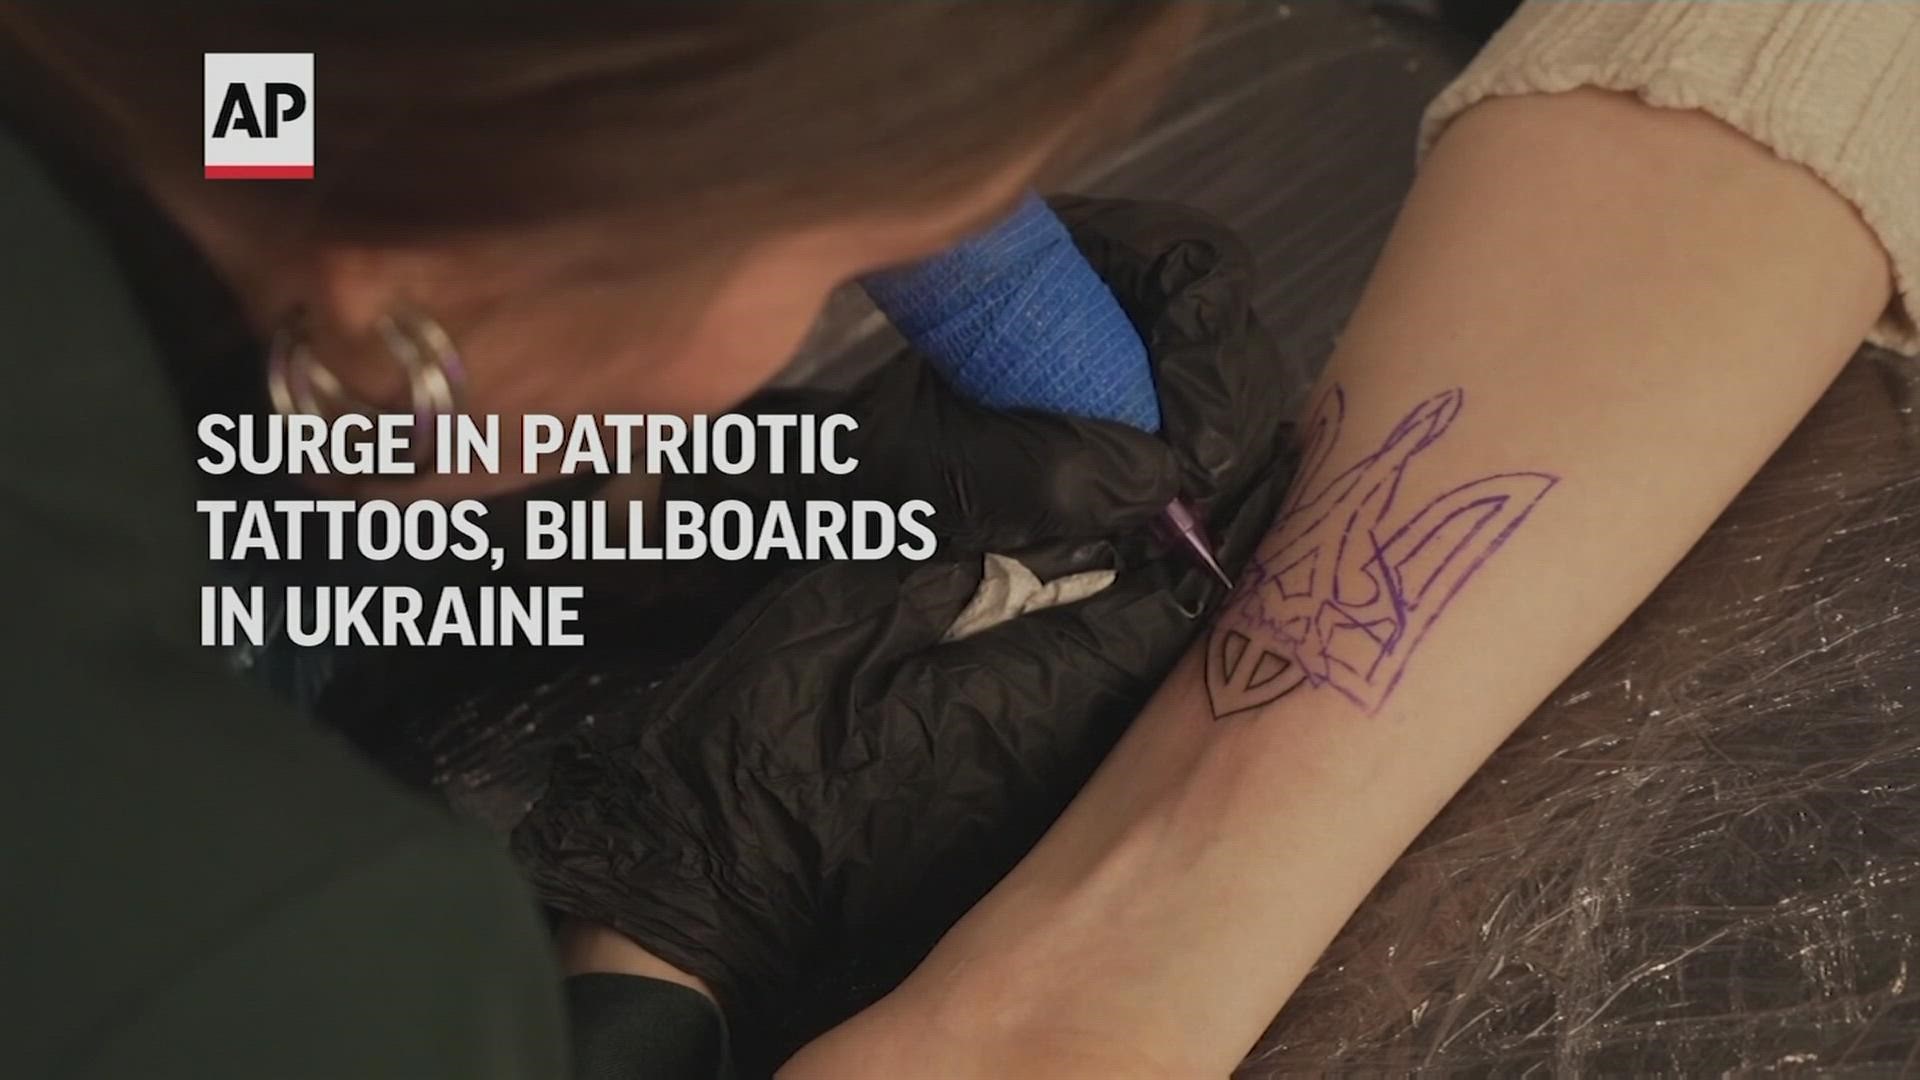 As the war in Ukraine enters its fourth week, patriotic messages are appearing on bodies and billboards.